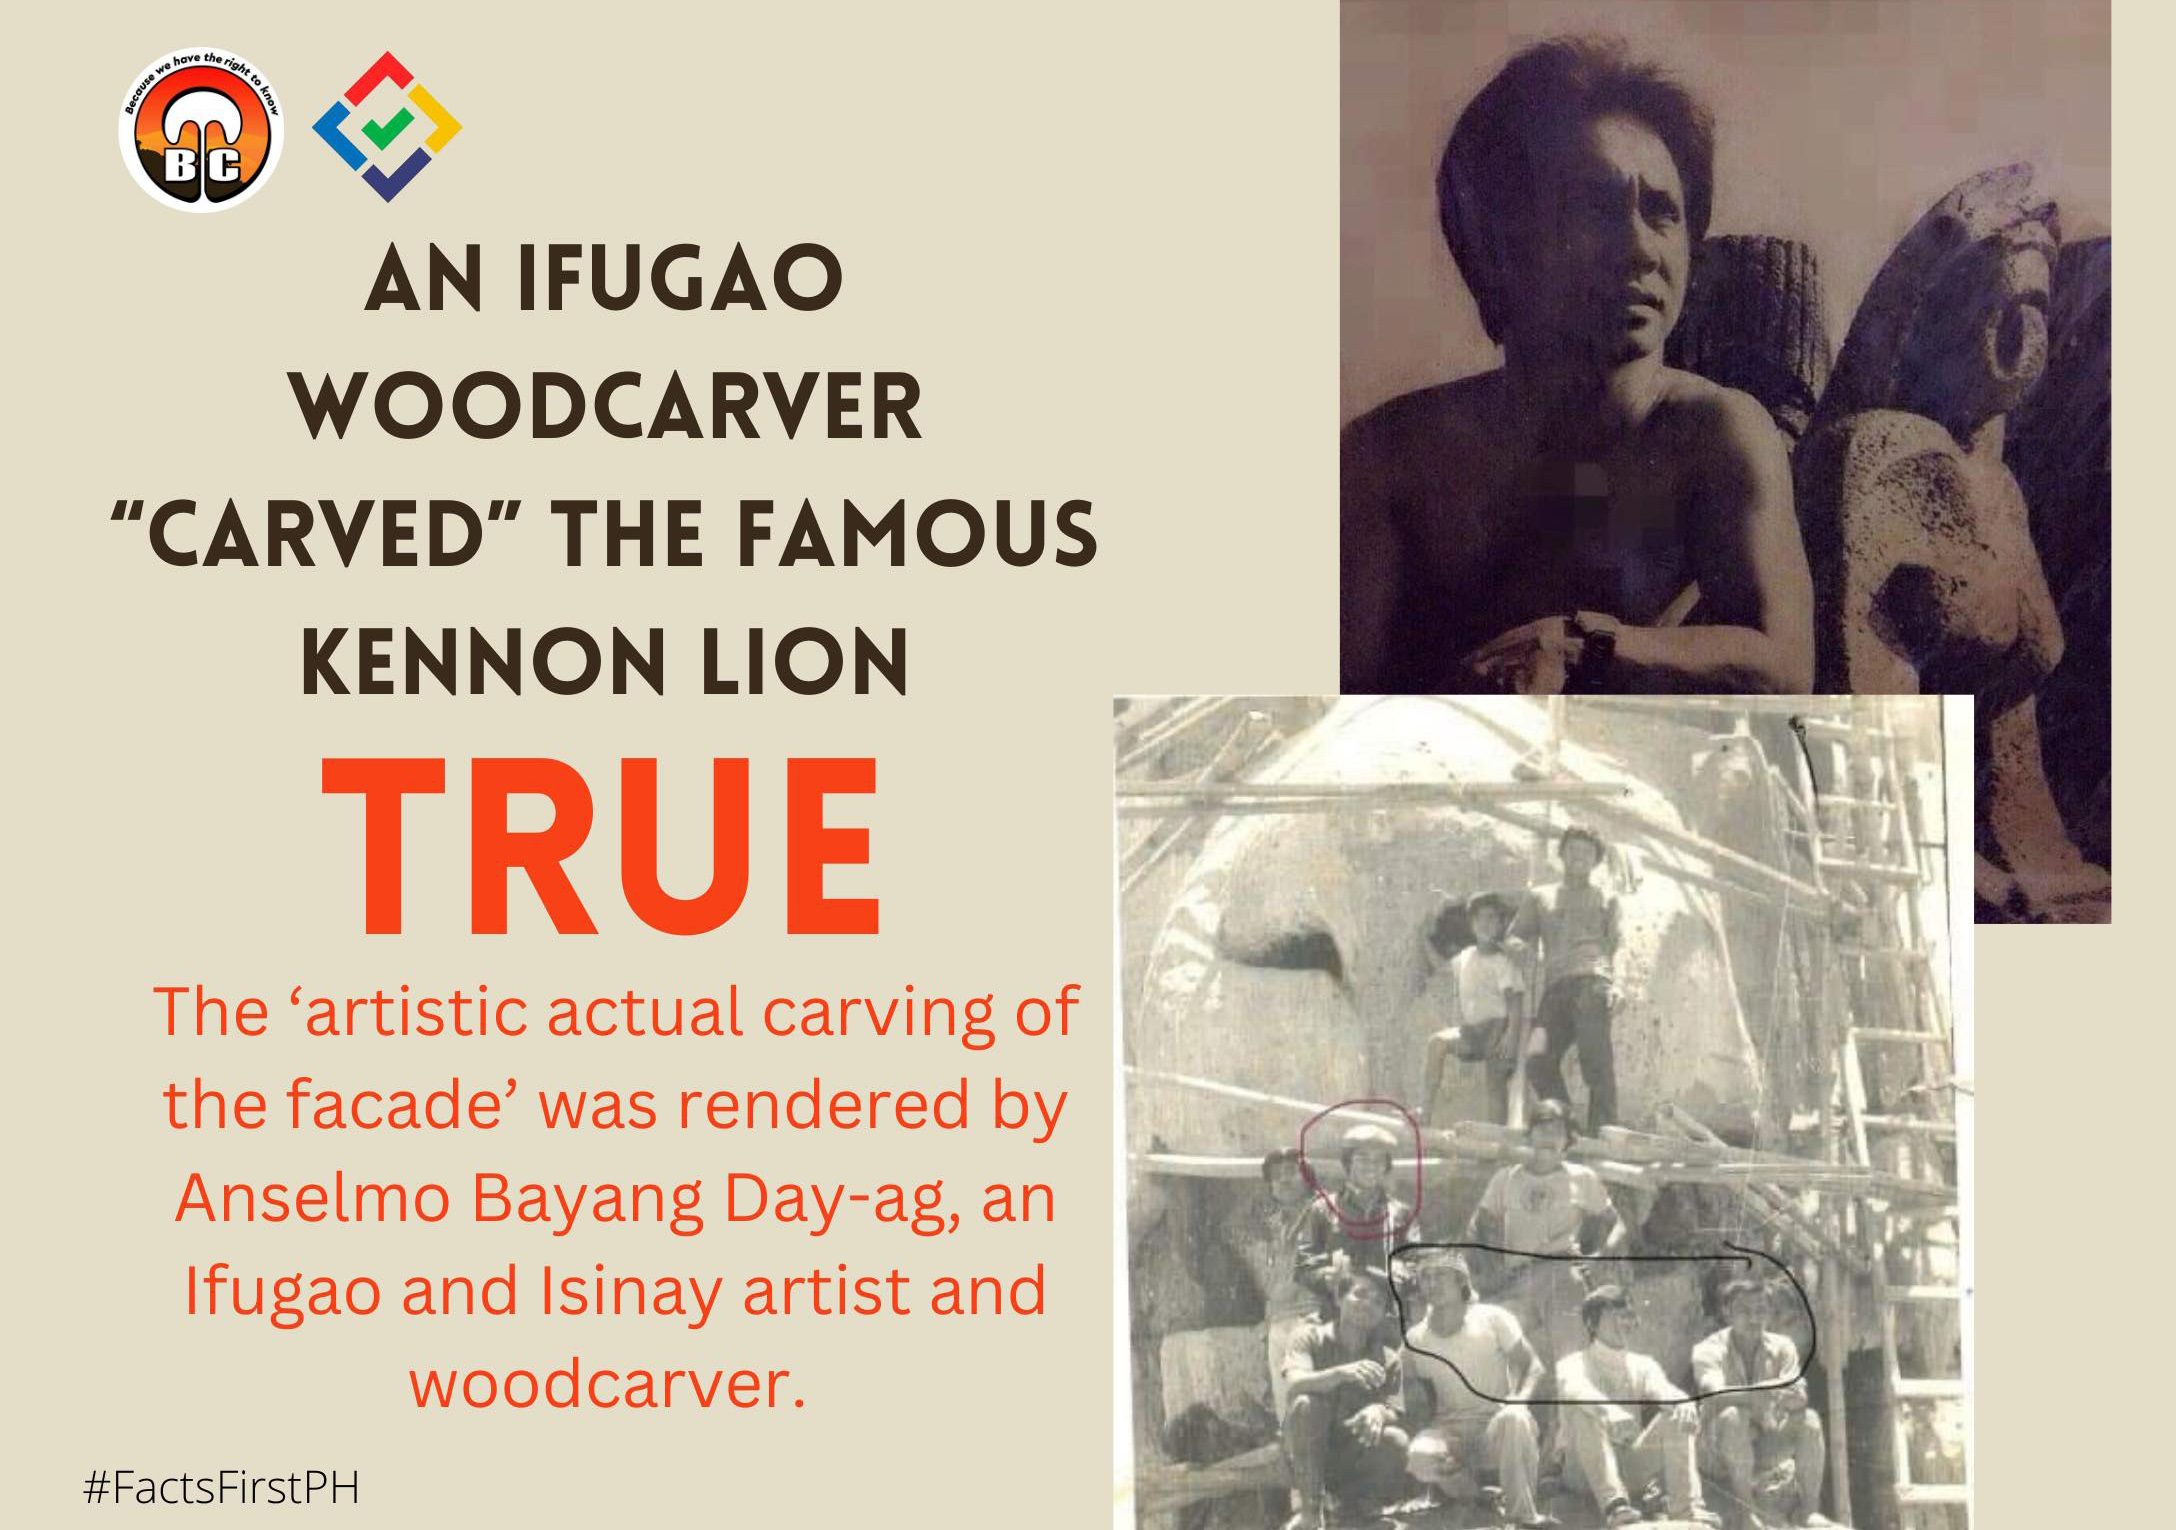 Fact Check: An Ifugao woodcarver “carved” the famous Kennon Lion￼